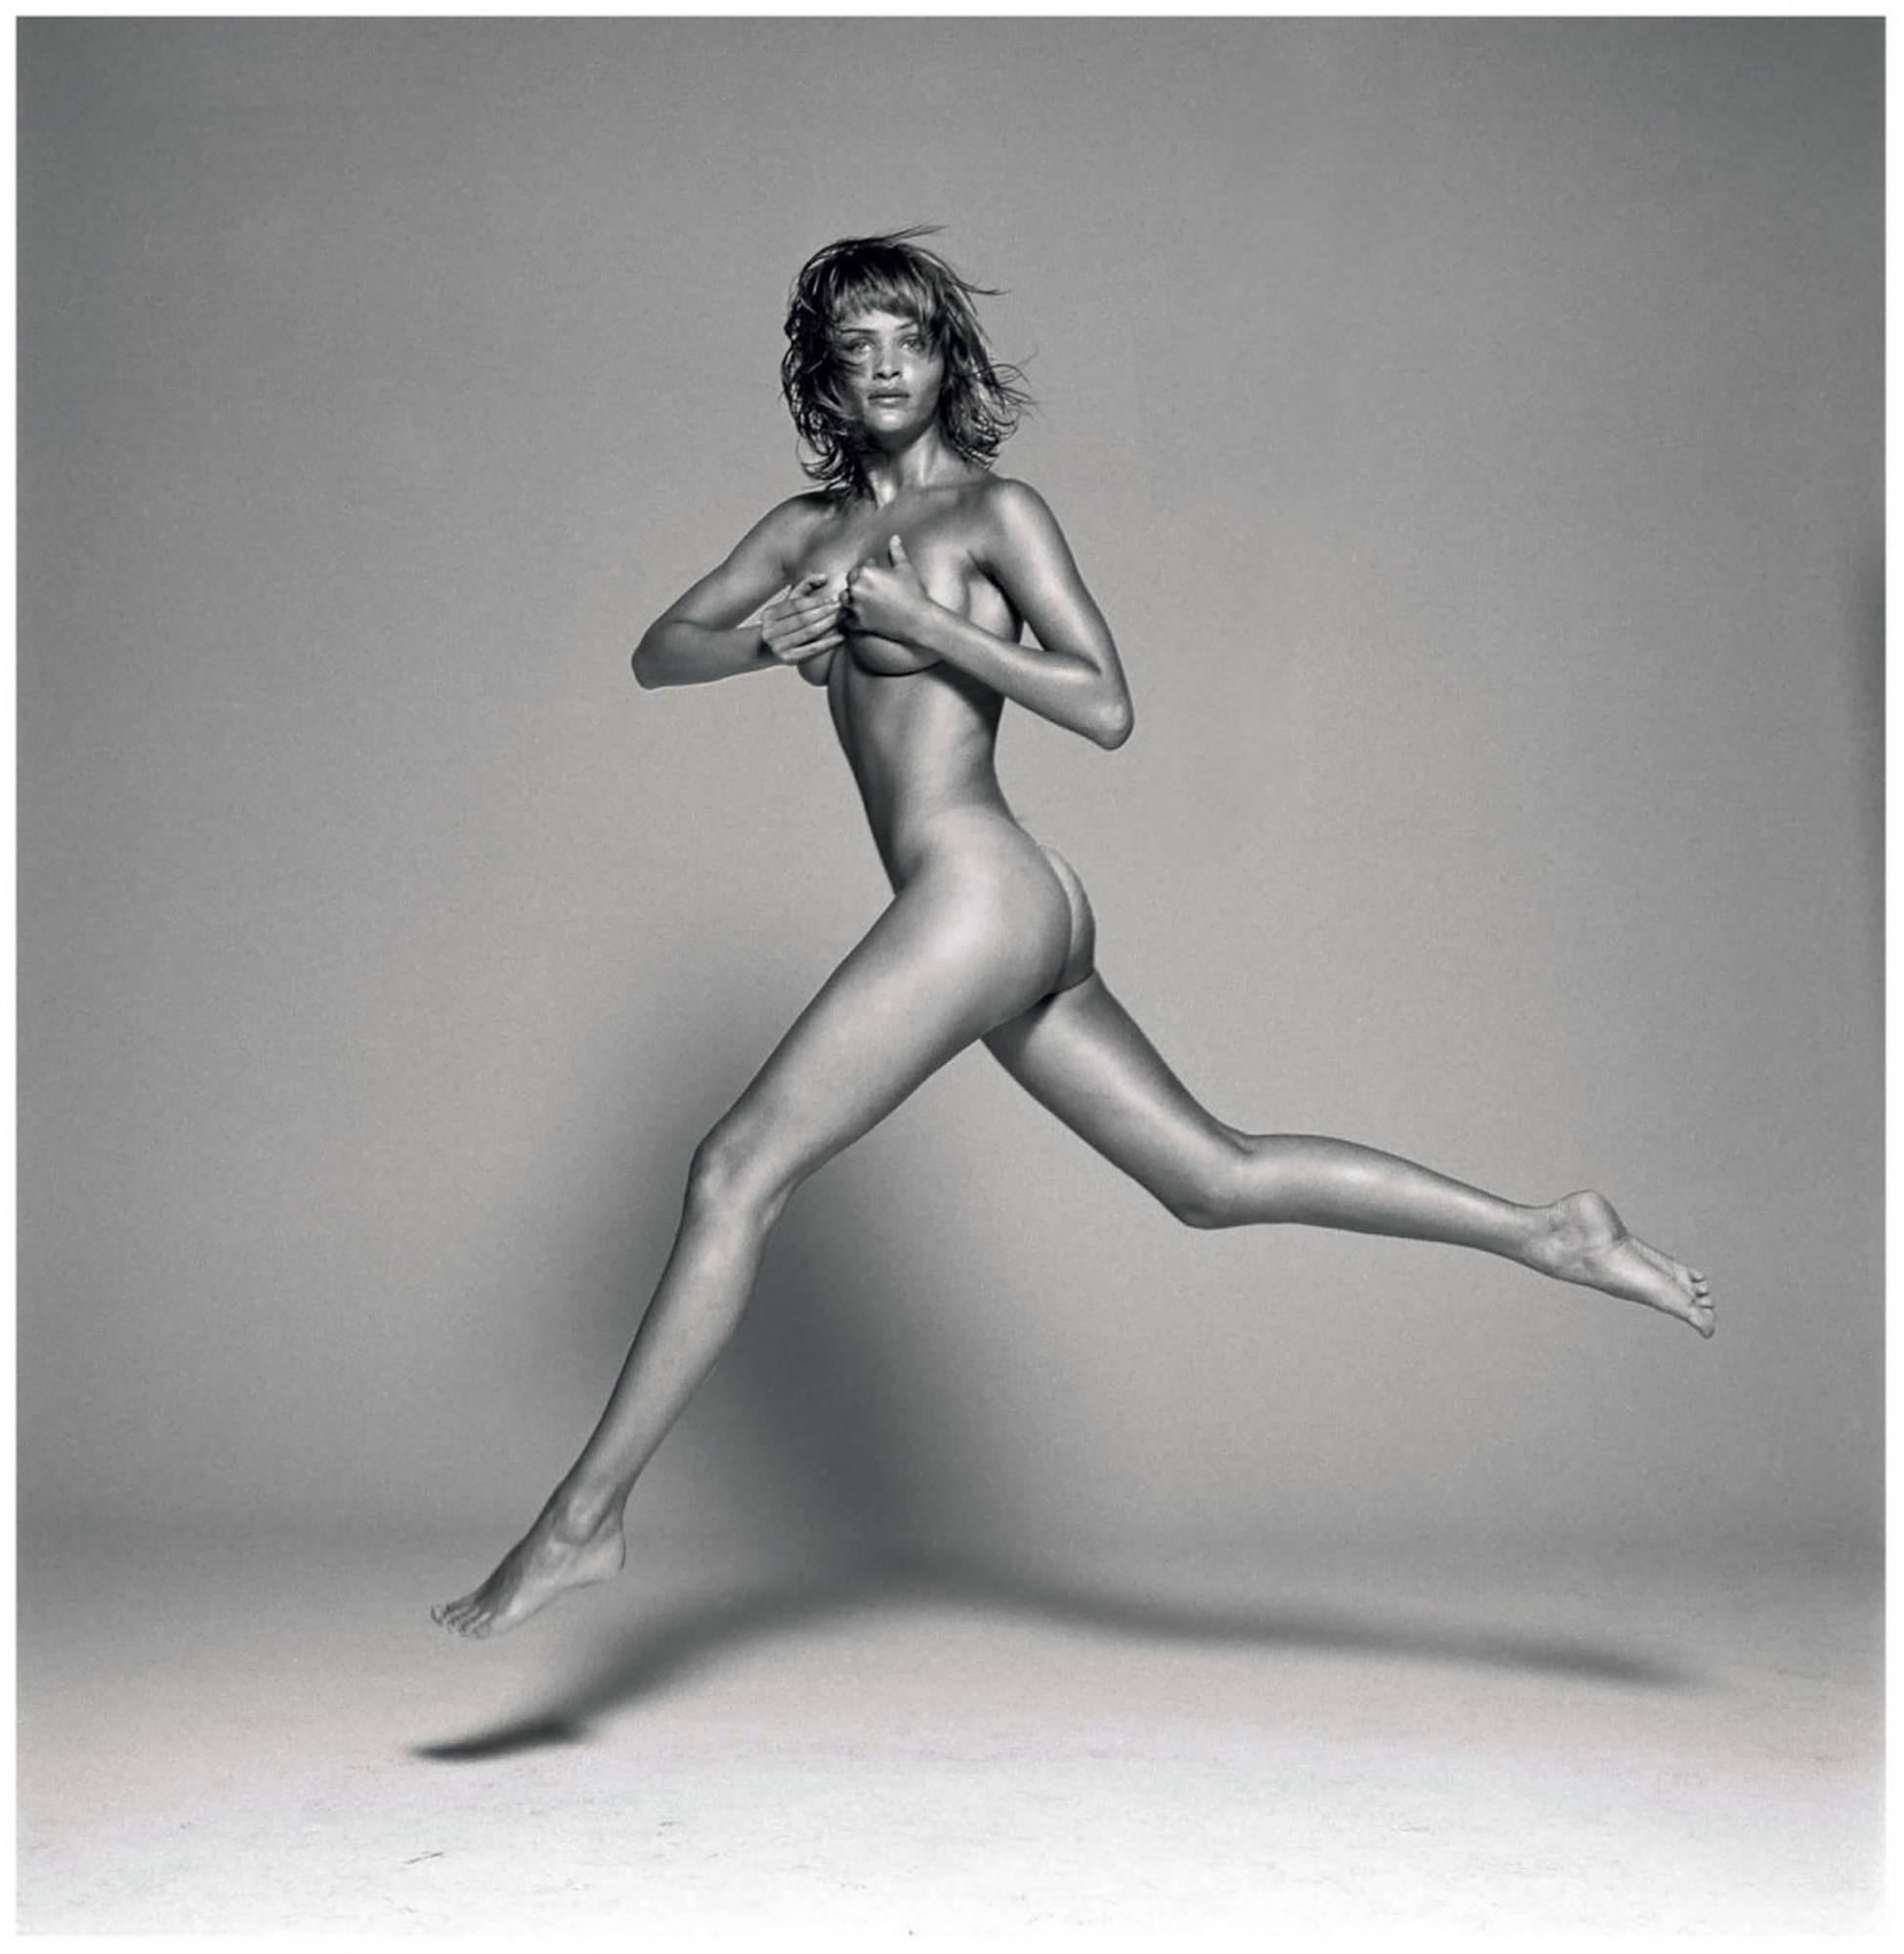 Michel Comte Black and White Photograph - Helena Christensen II - the nude supermodel jumping in the air 